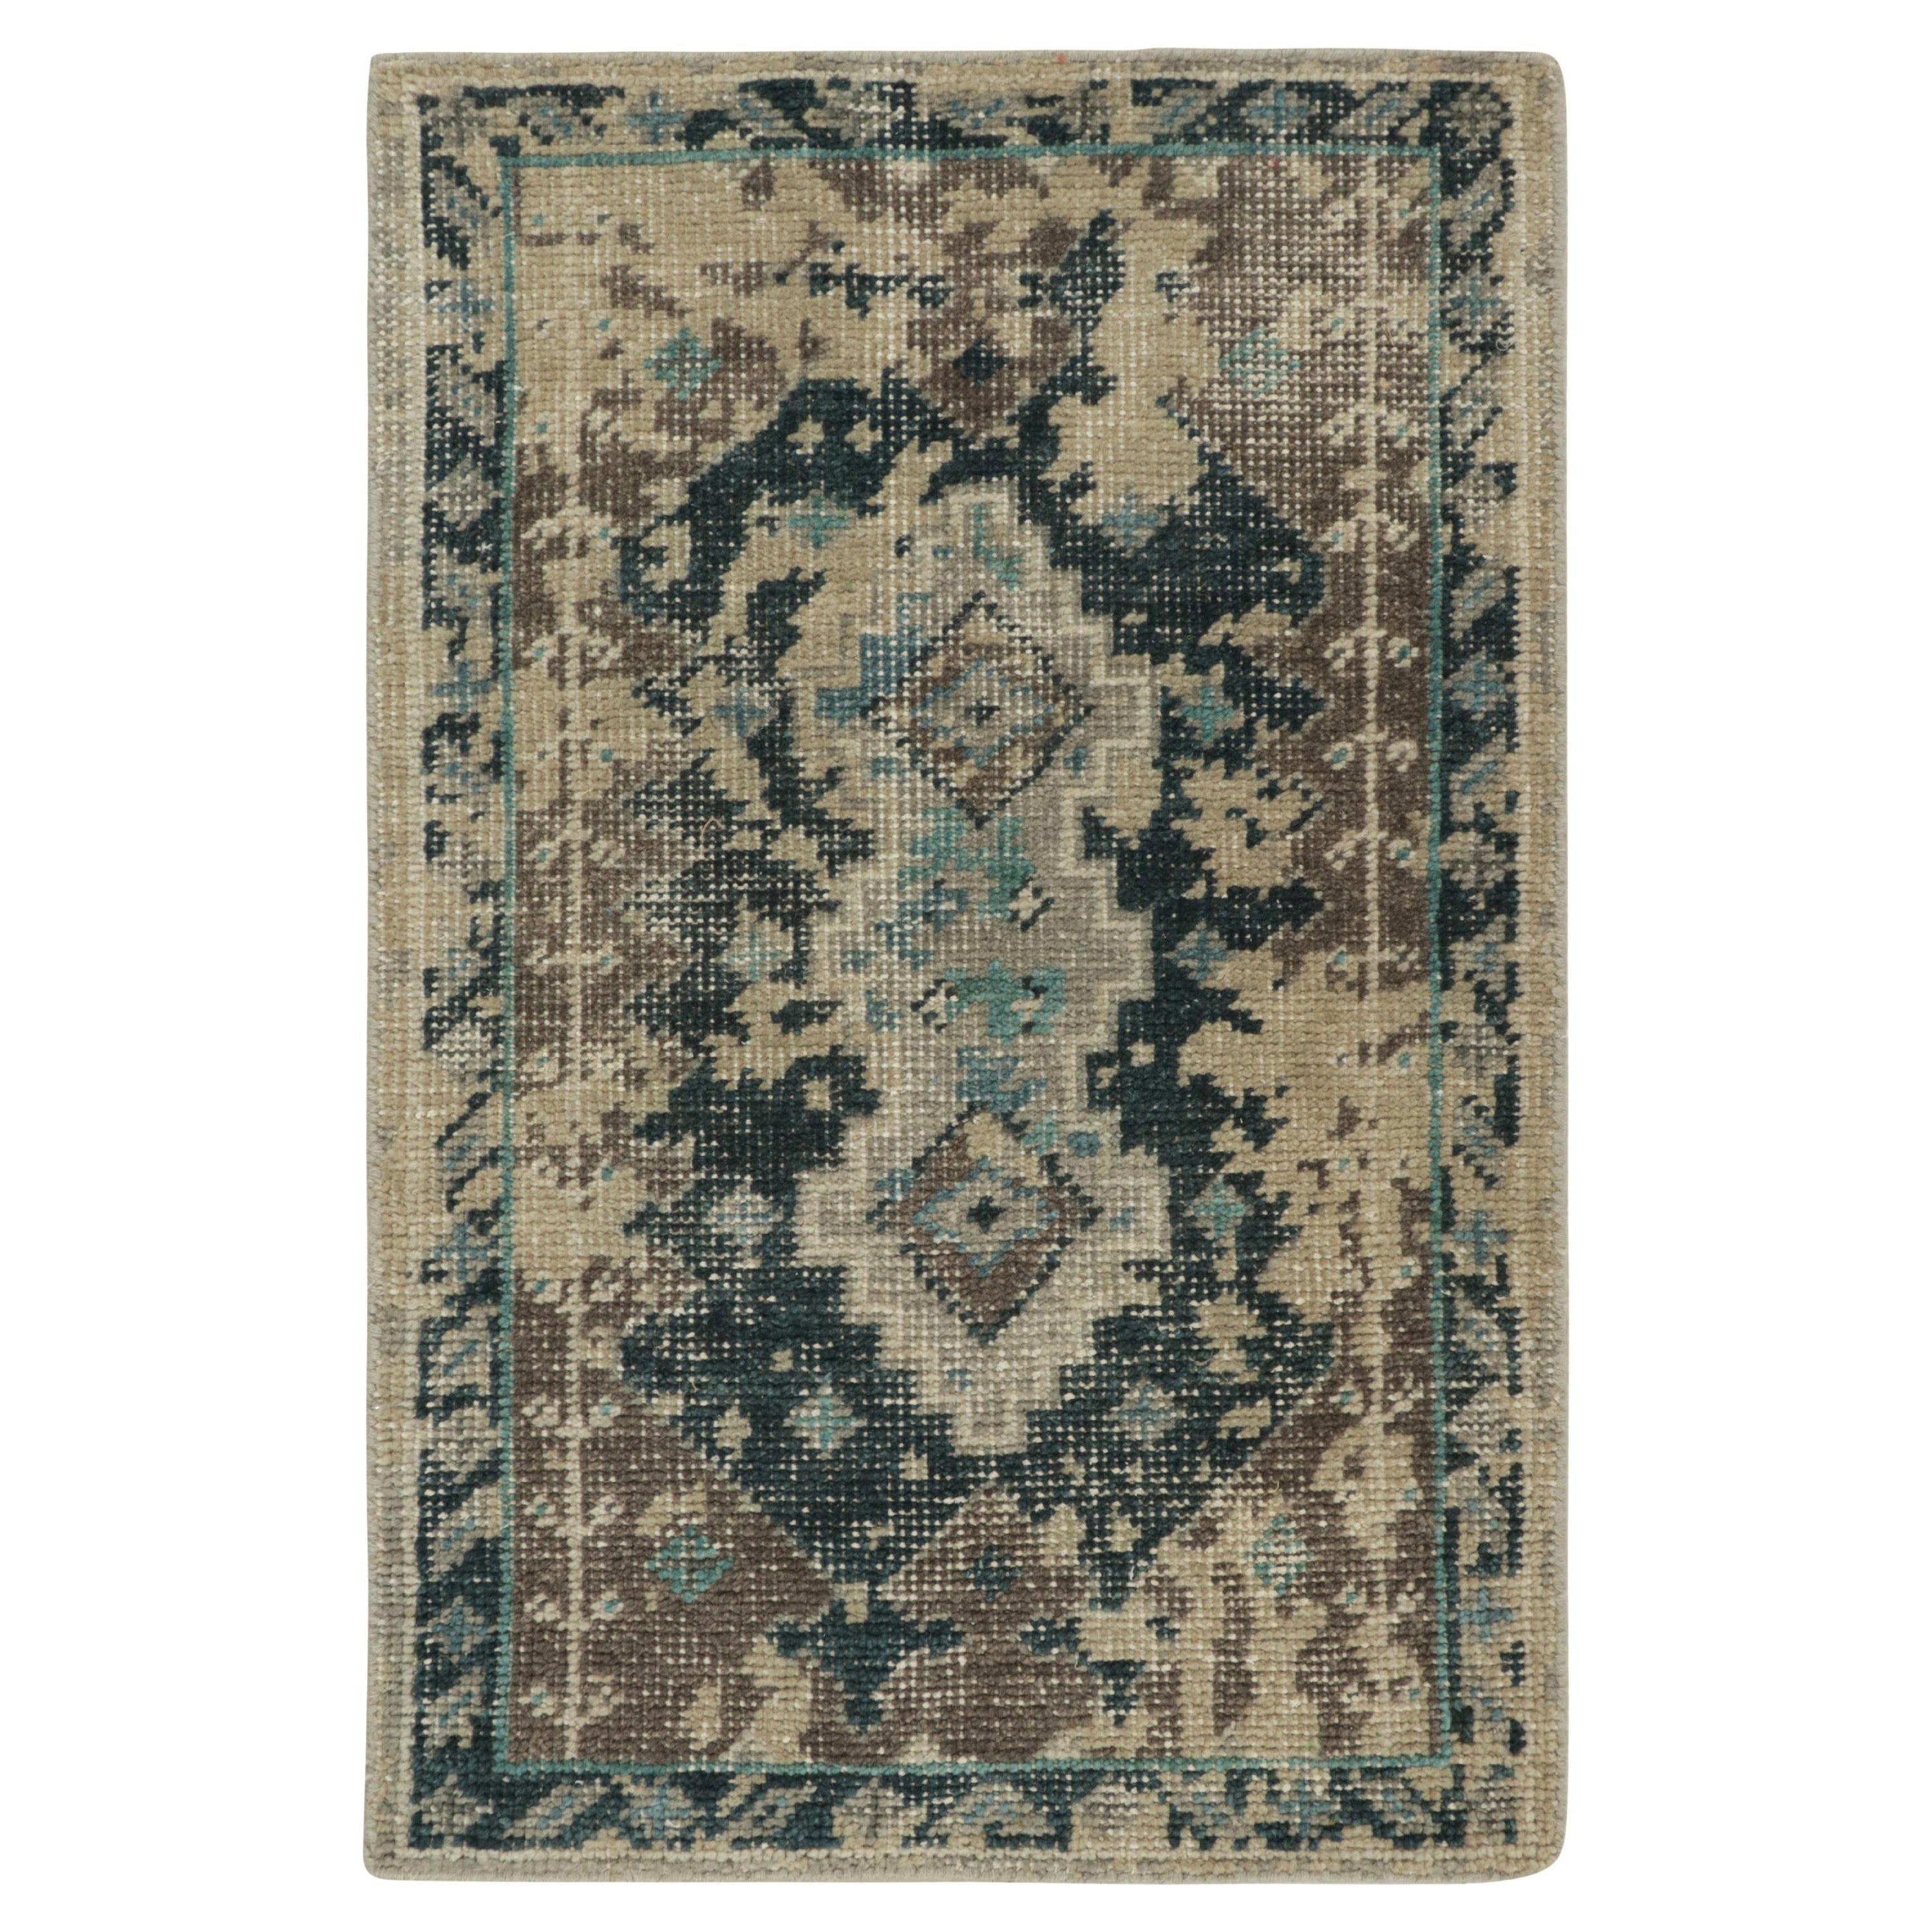 Rug & Kilim's Distressed Style Scatter Rug in Blue, Beige-Brown Pattern For Sale